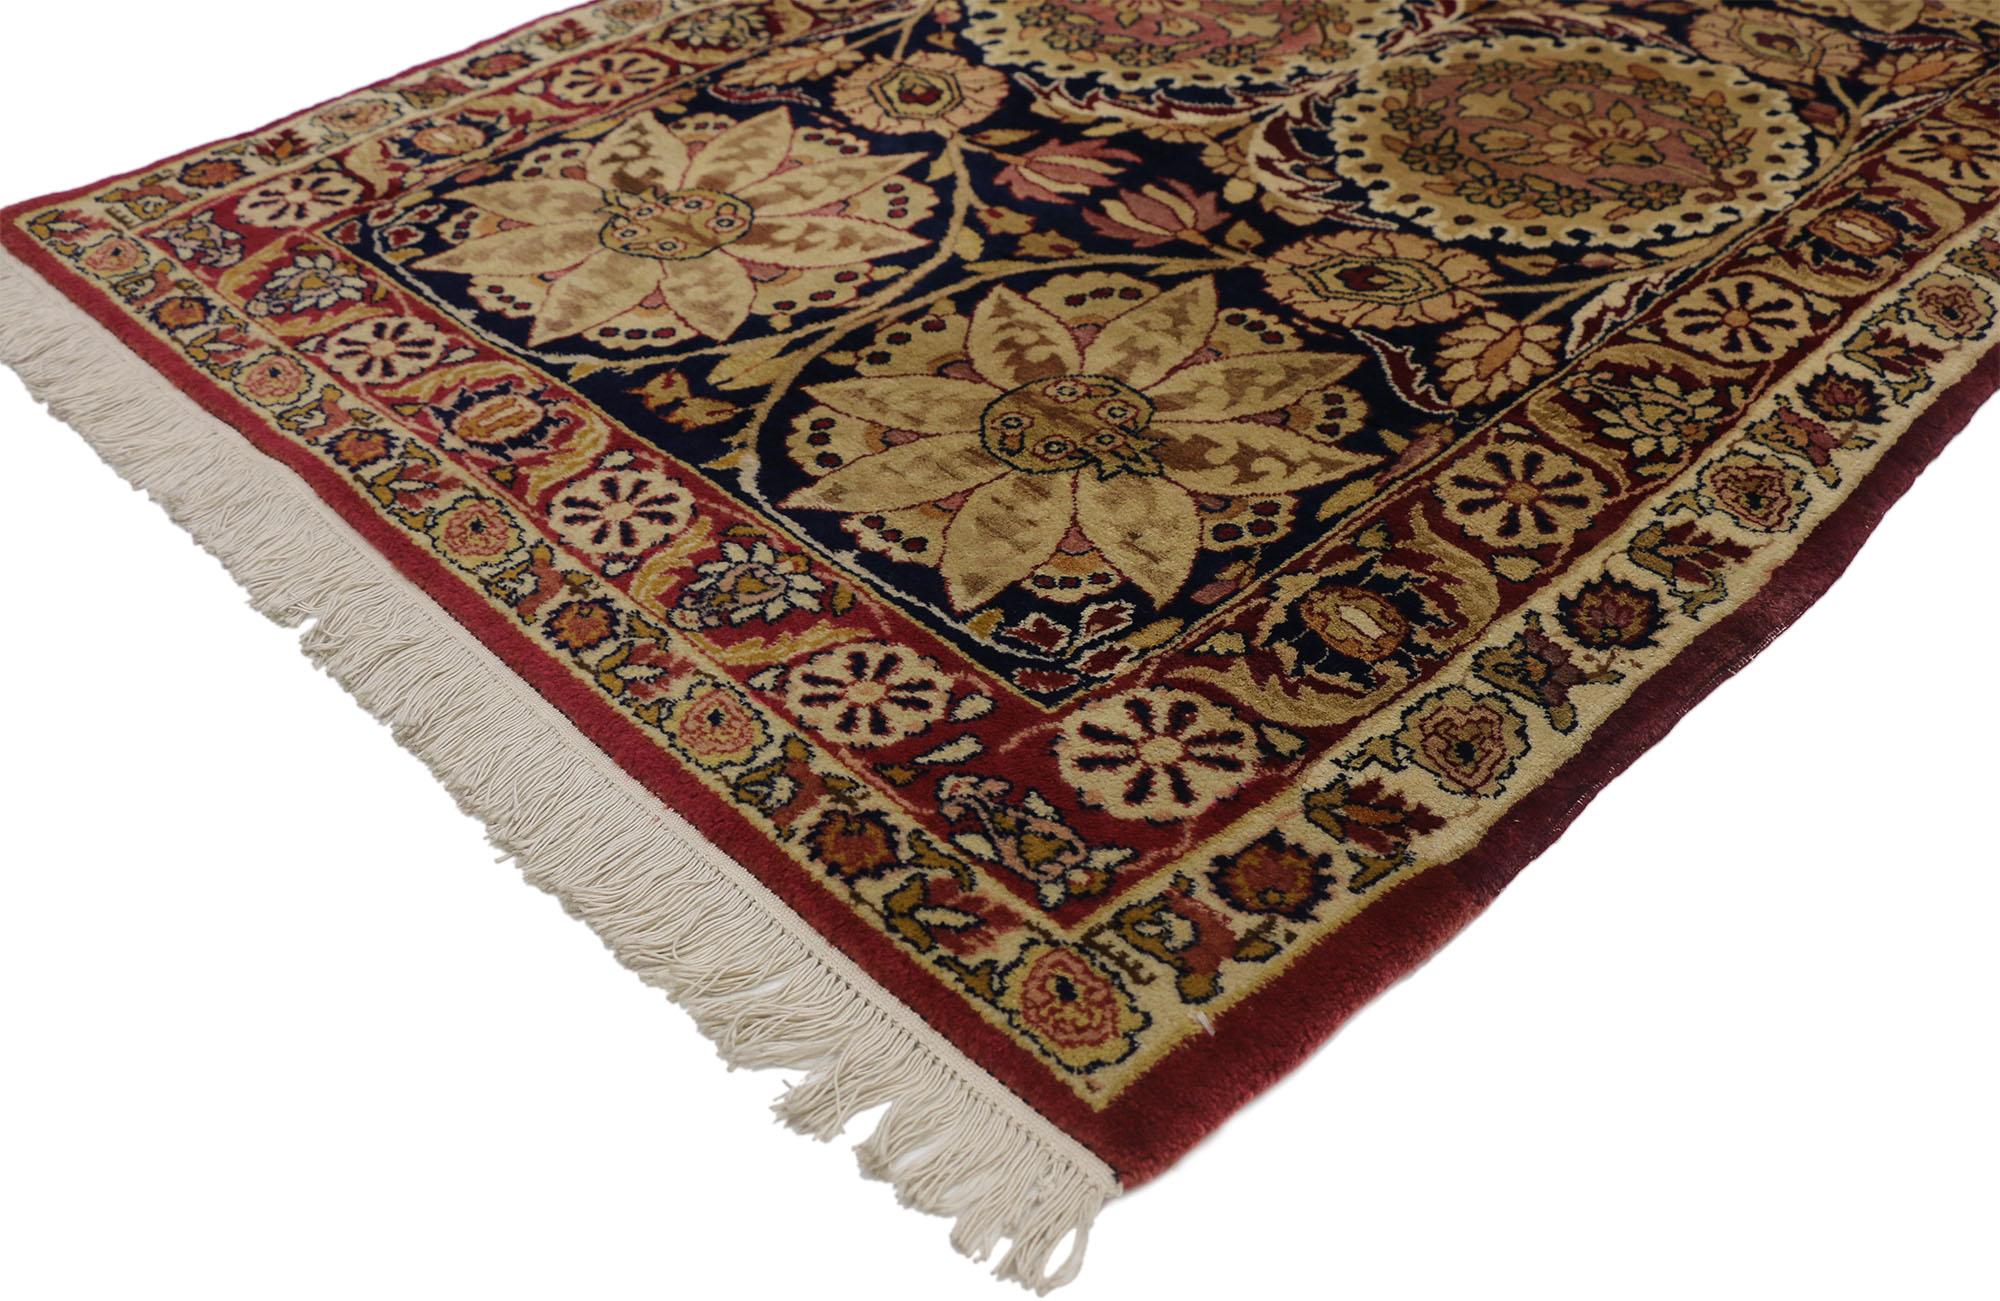 73285, antique Persian Kermanshah rug with traditional style. This exquisite rug features two rows of medallions with alternating lotus flowers rendered in pink-lavender, sage, burgundy and cream on a field of deep sapphire blue. The Persian